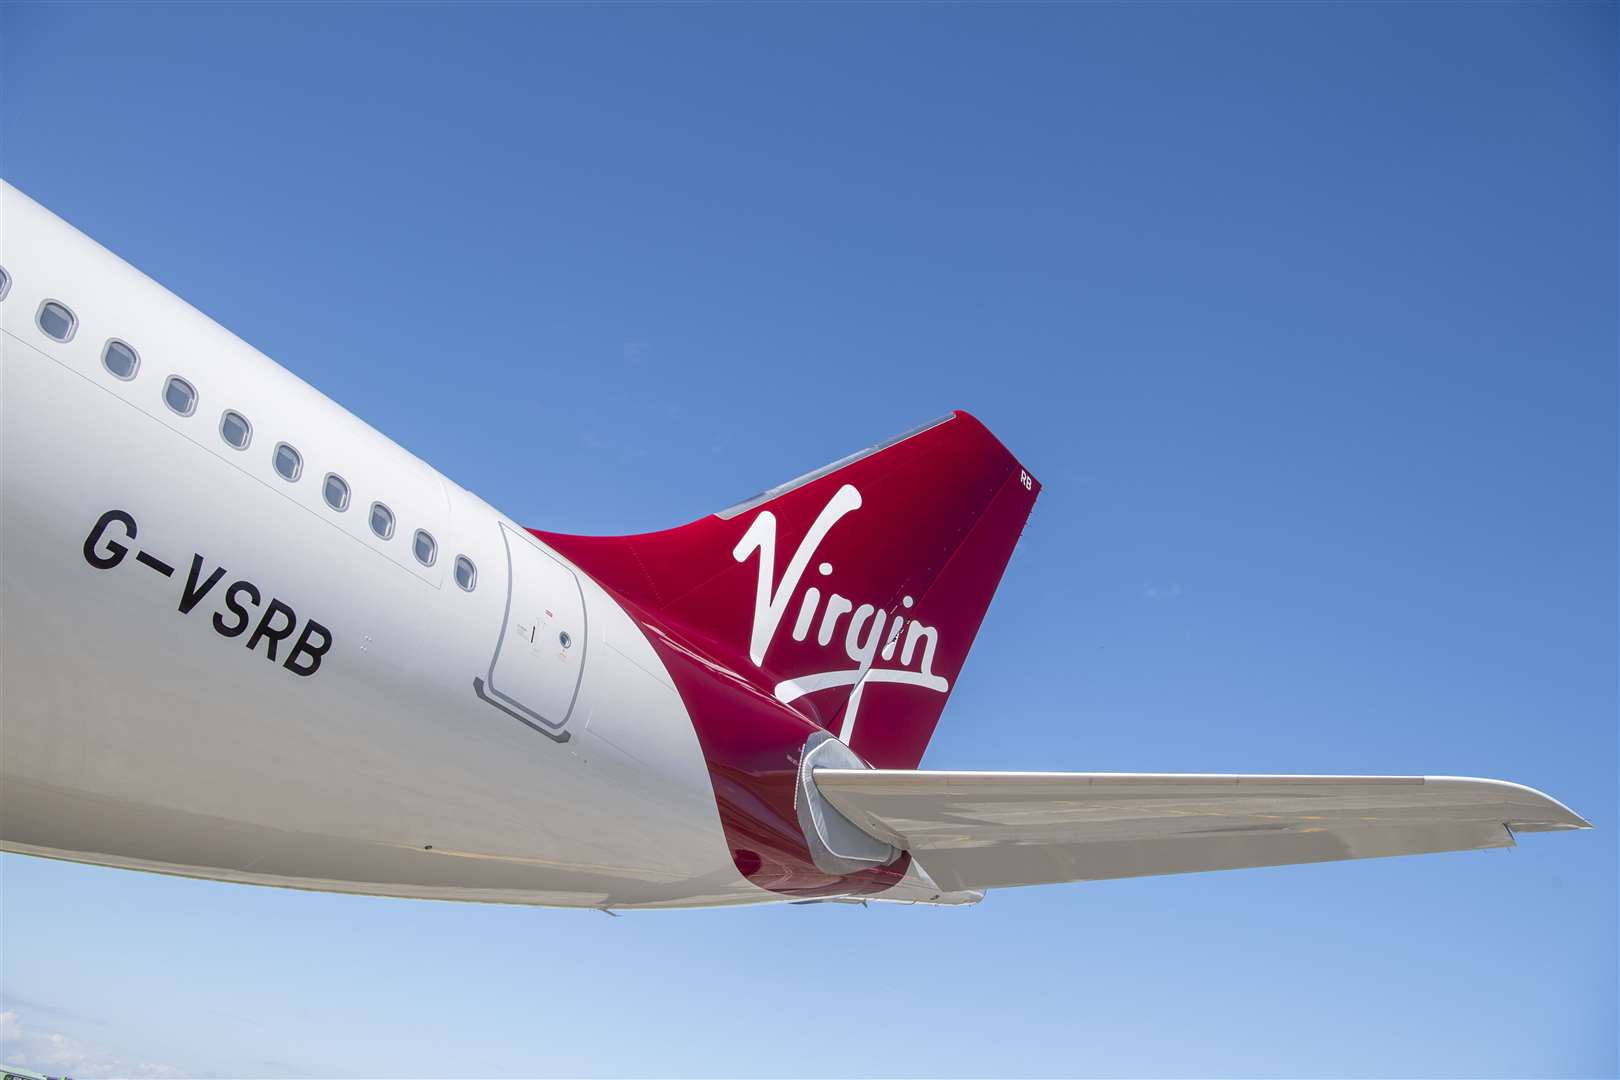 The tail of the new plane (Virgin Atlantic/PA)